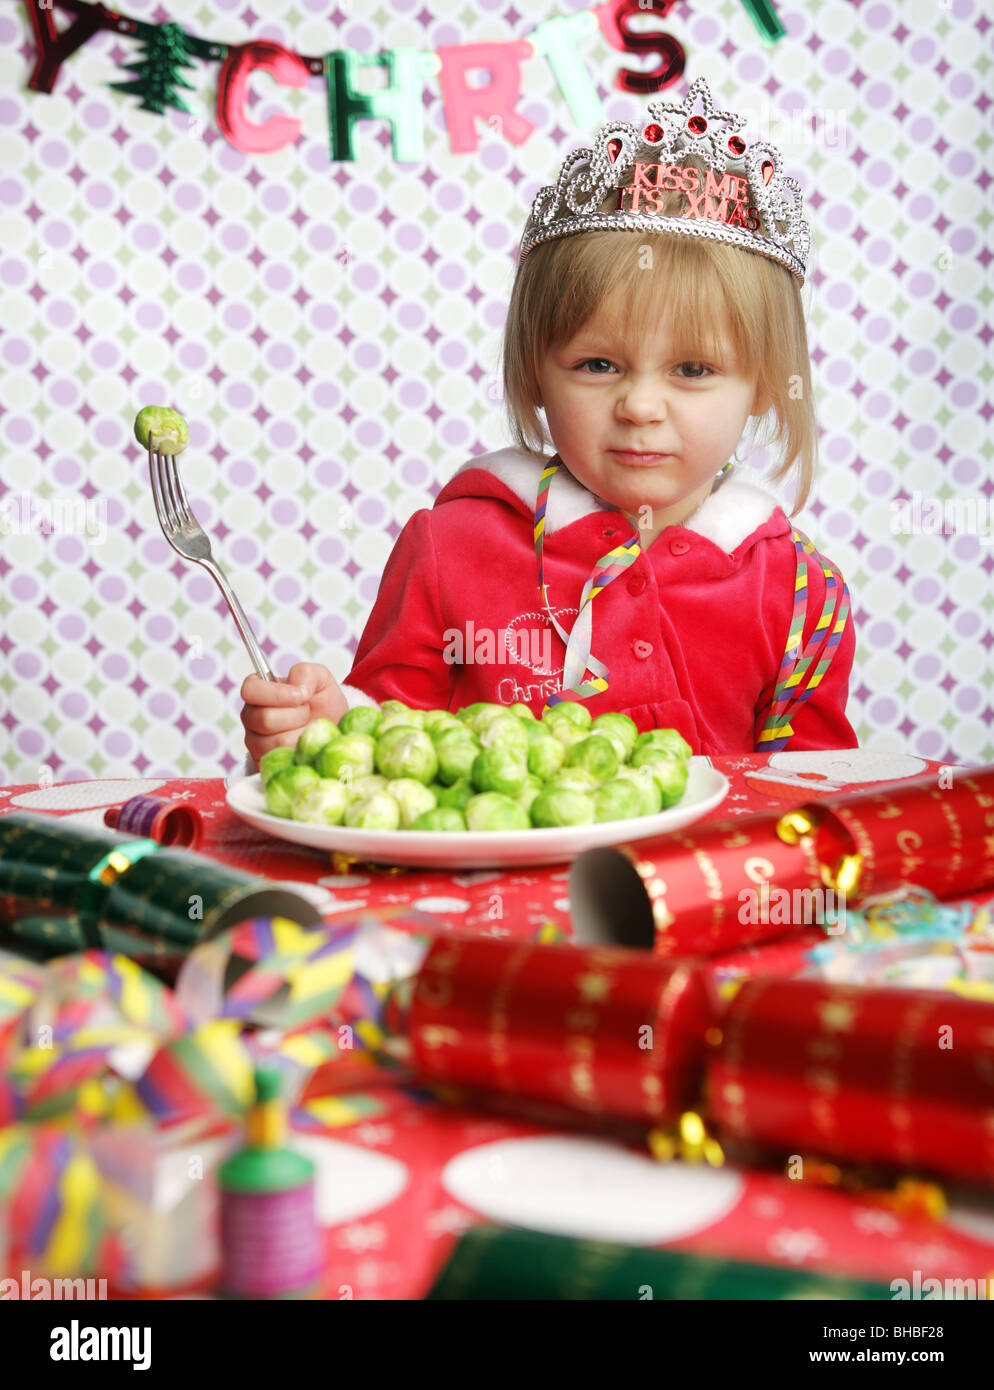 A young child sitting at a table decorated for Christmas with one sprout on her fork. Stock Photo